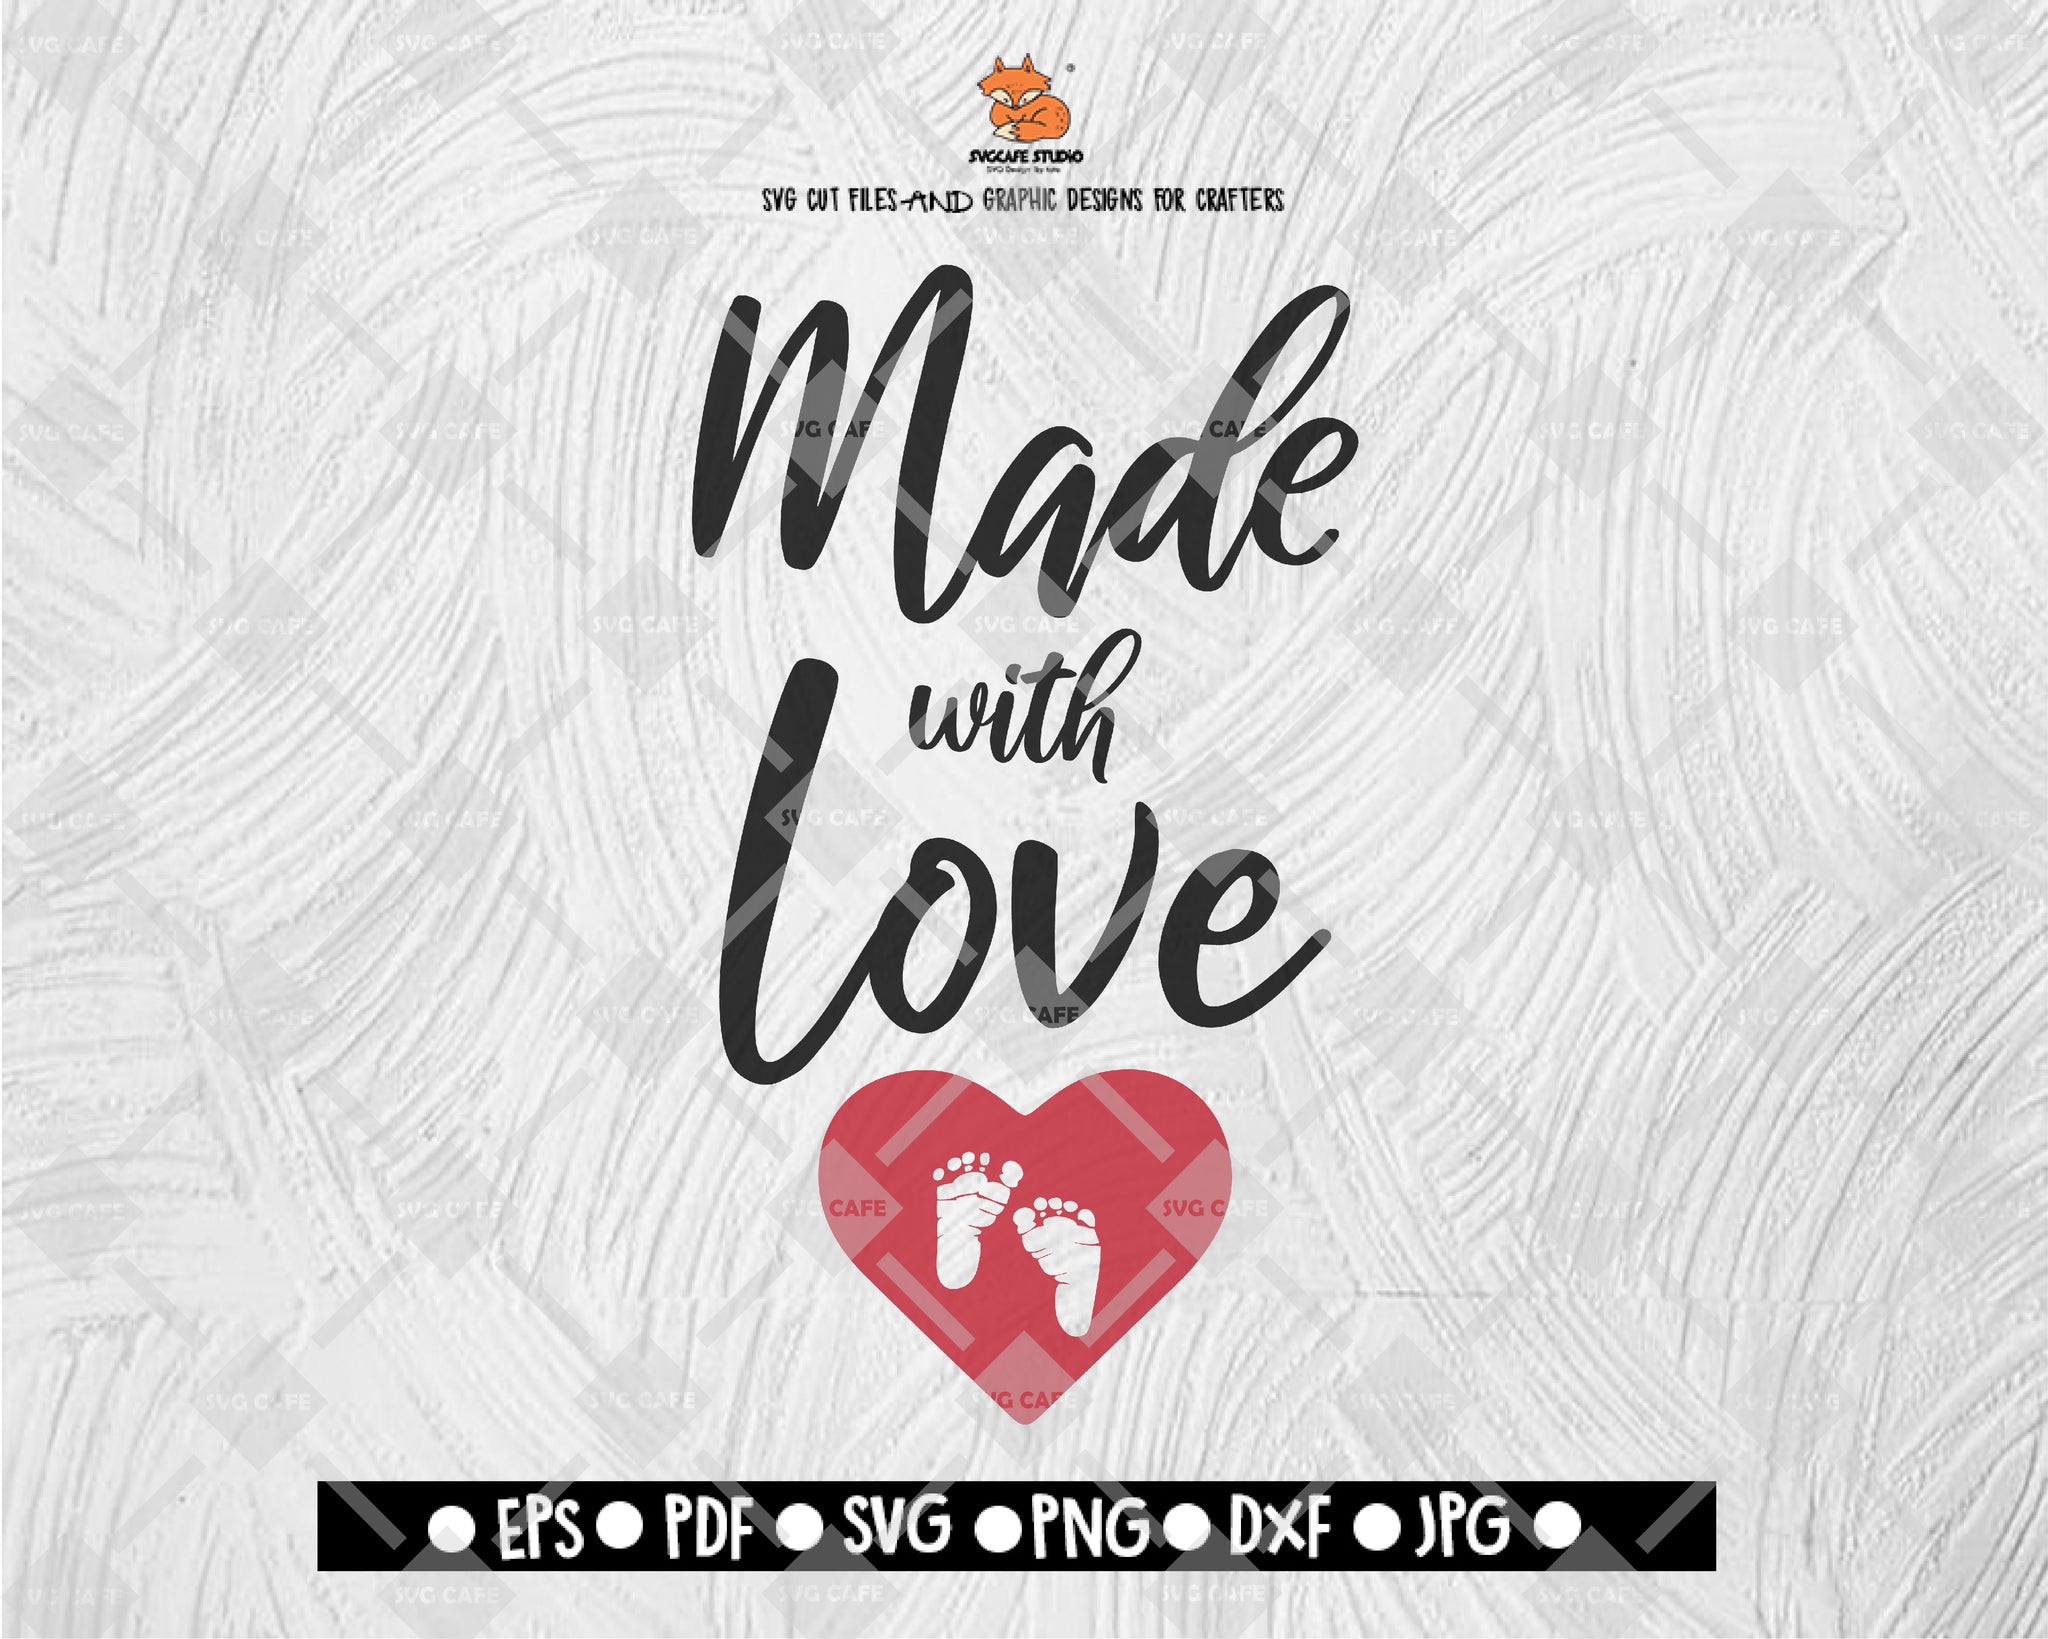 Made with Love SVG - Valentine Love SVG - Valentine's Day SVG Clipart Vector for Silhouette, Cricut Cutting Machine Digital File Download